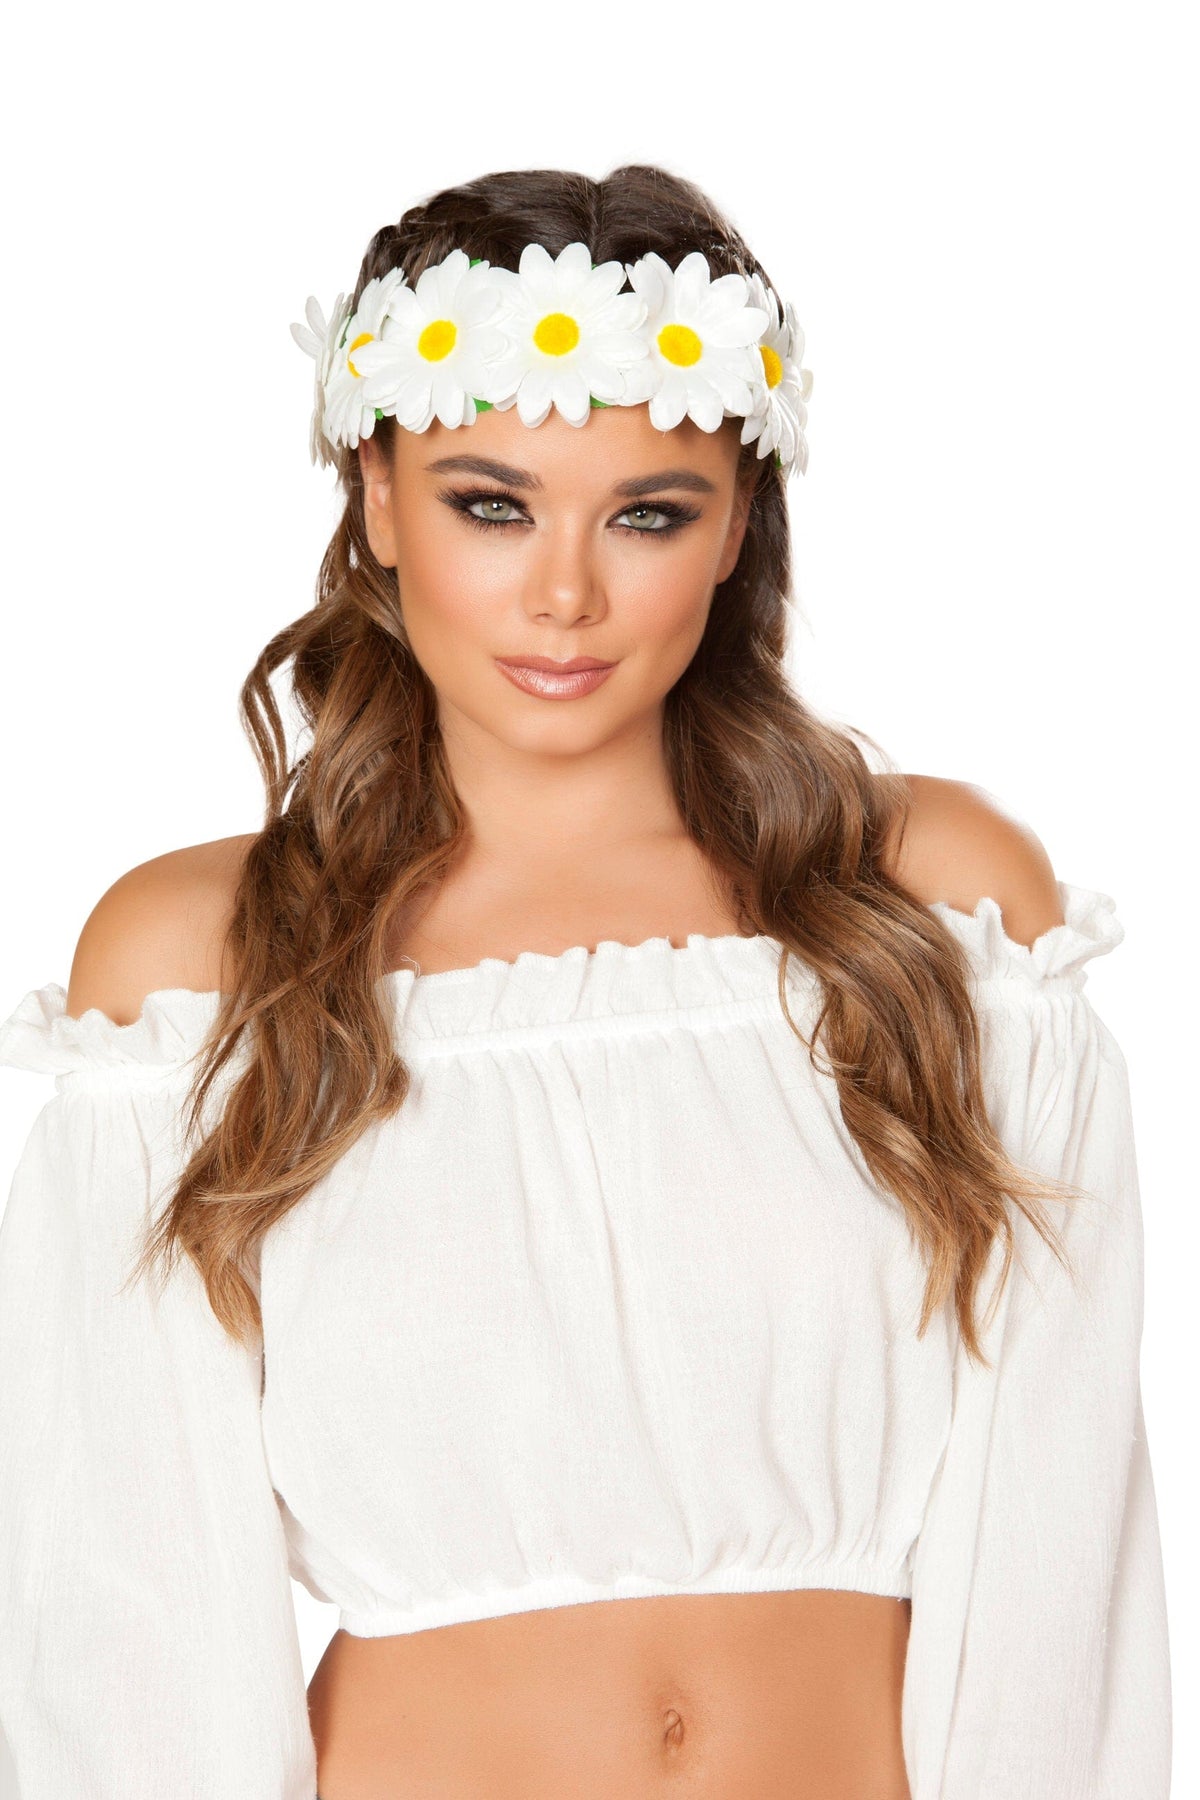 Roma Small / Multicolor Light-up Sunflower Headband 4882-AS-O/S Apparel &amp; Accessories &gt; Costumes &amp; Accessories &gt; Costumes